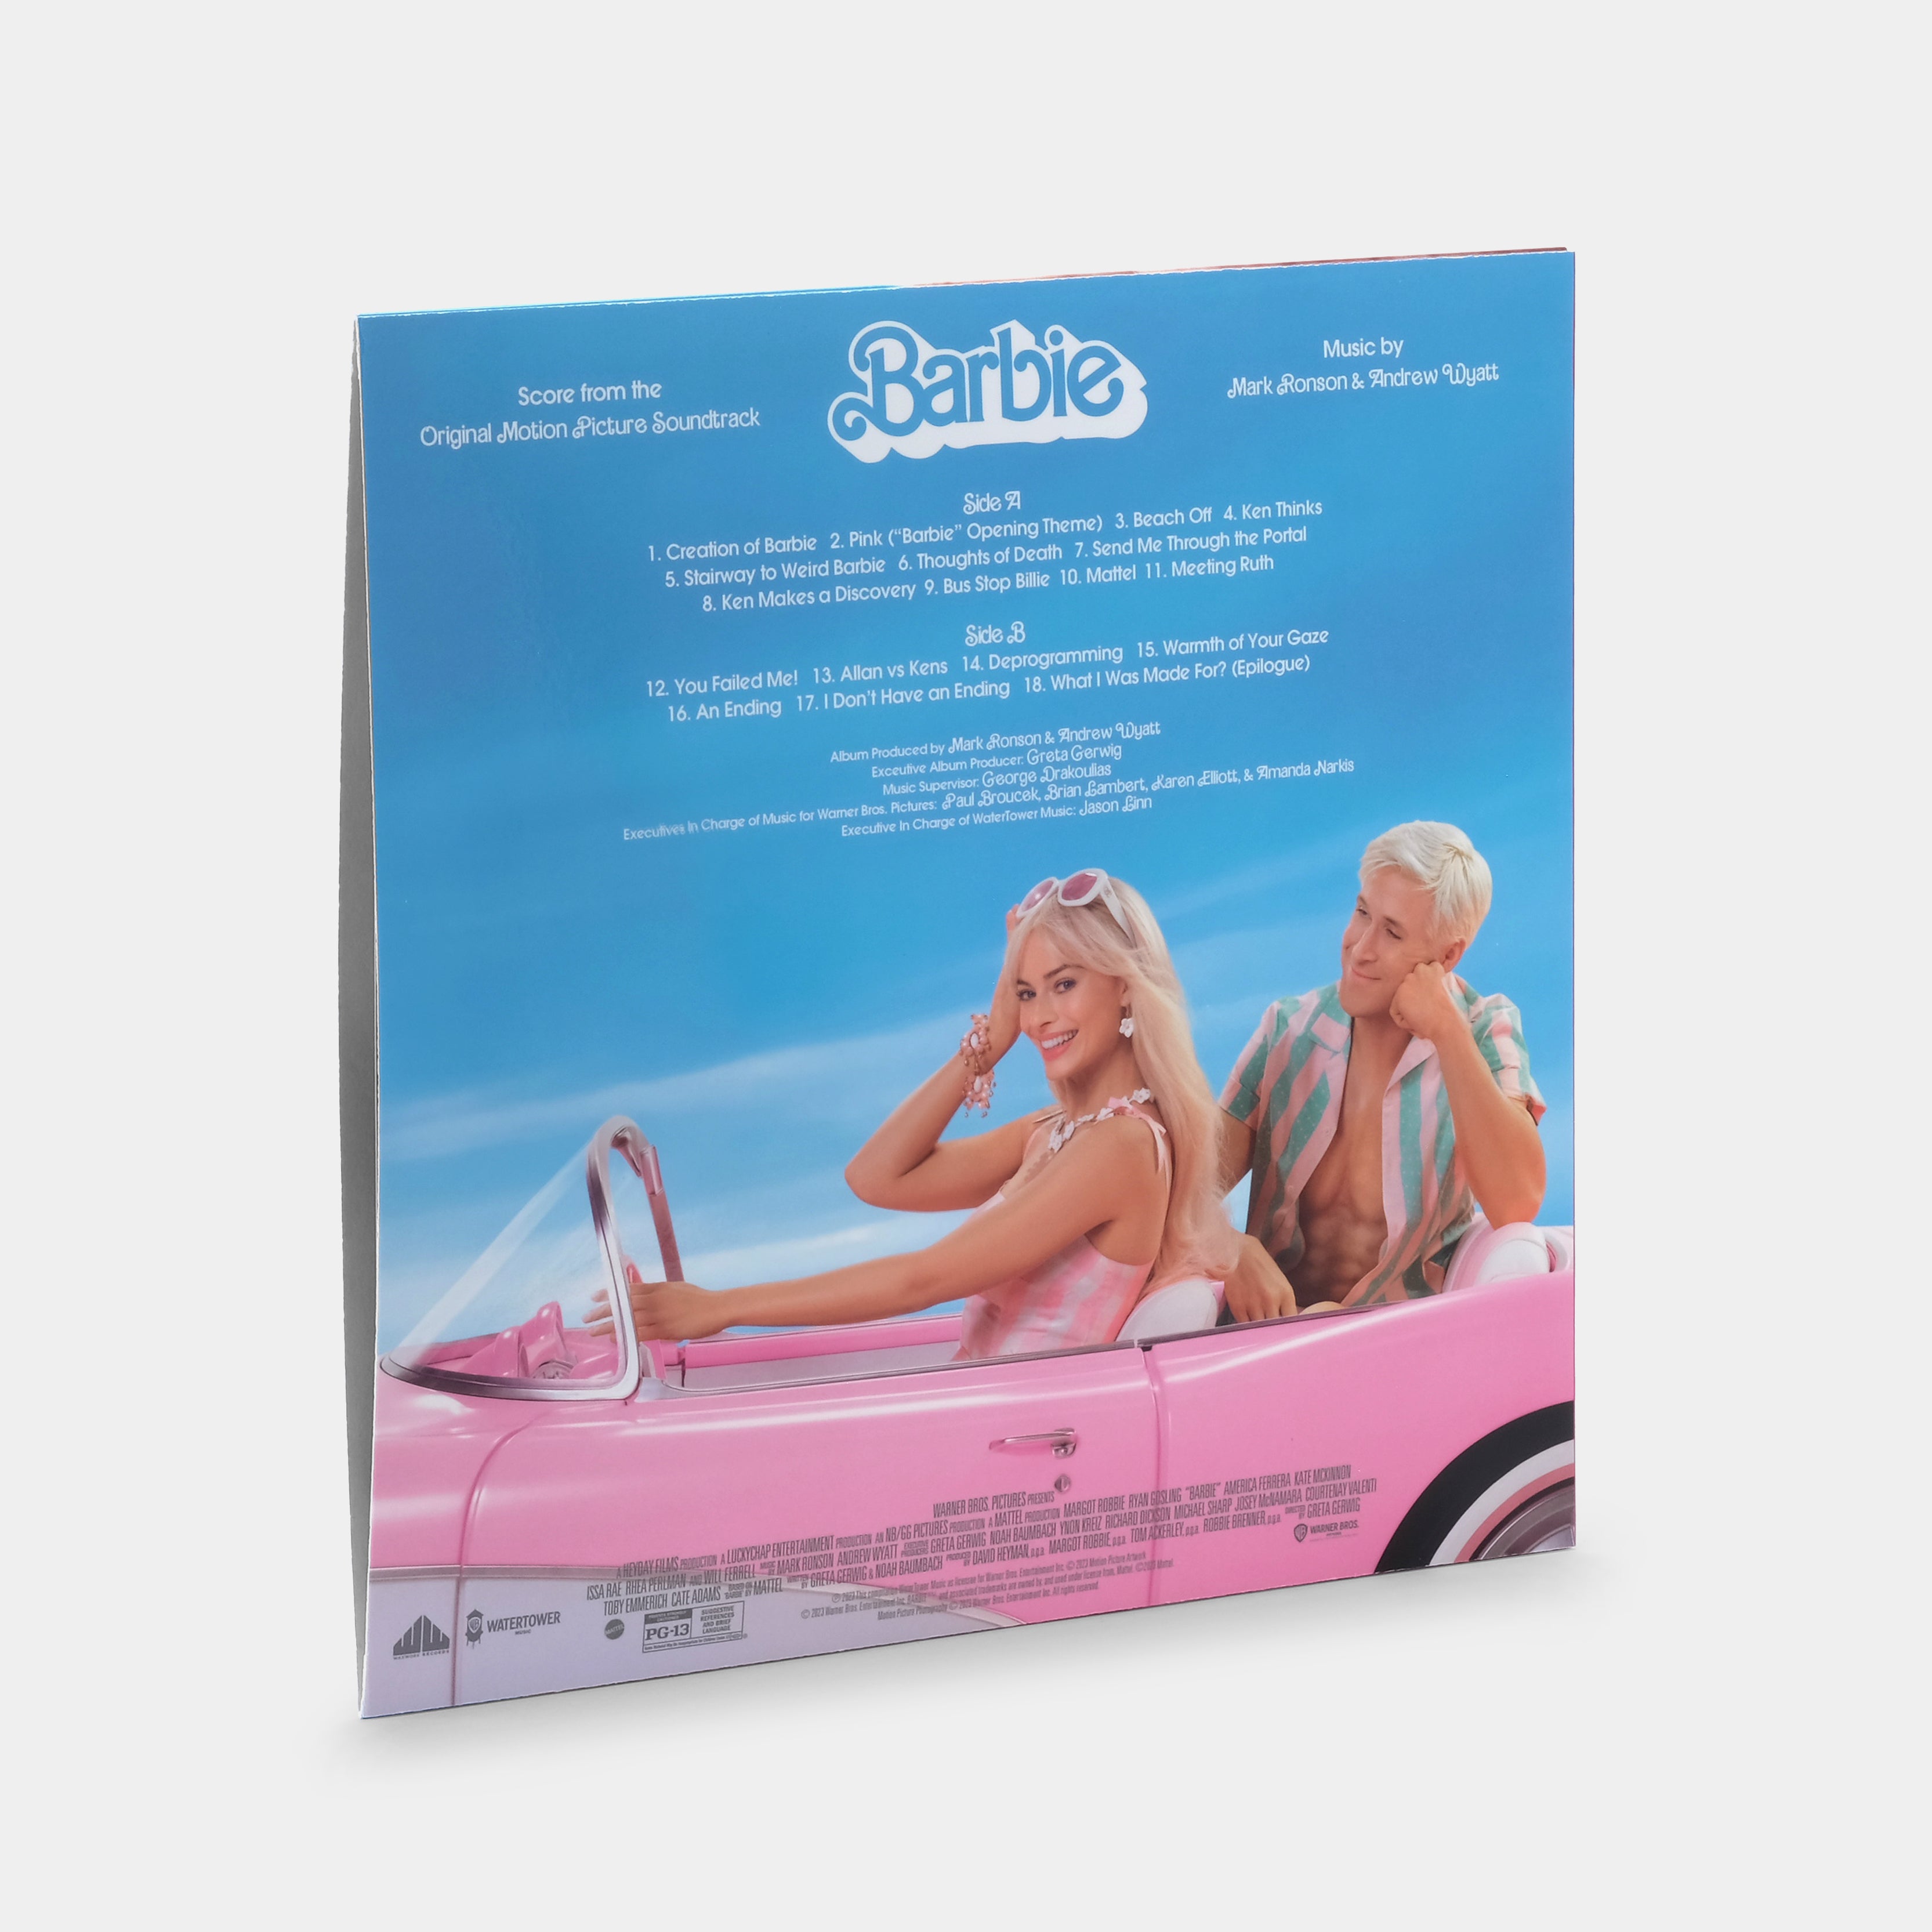 Mark Ronson, Andrew Wyatt - Barbie (Score From The Original Motion Picture Soundtrack) LP Neon Barbie Pink Vinyl Record